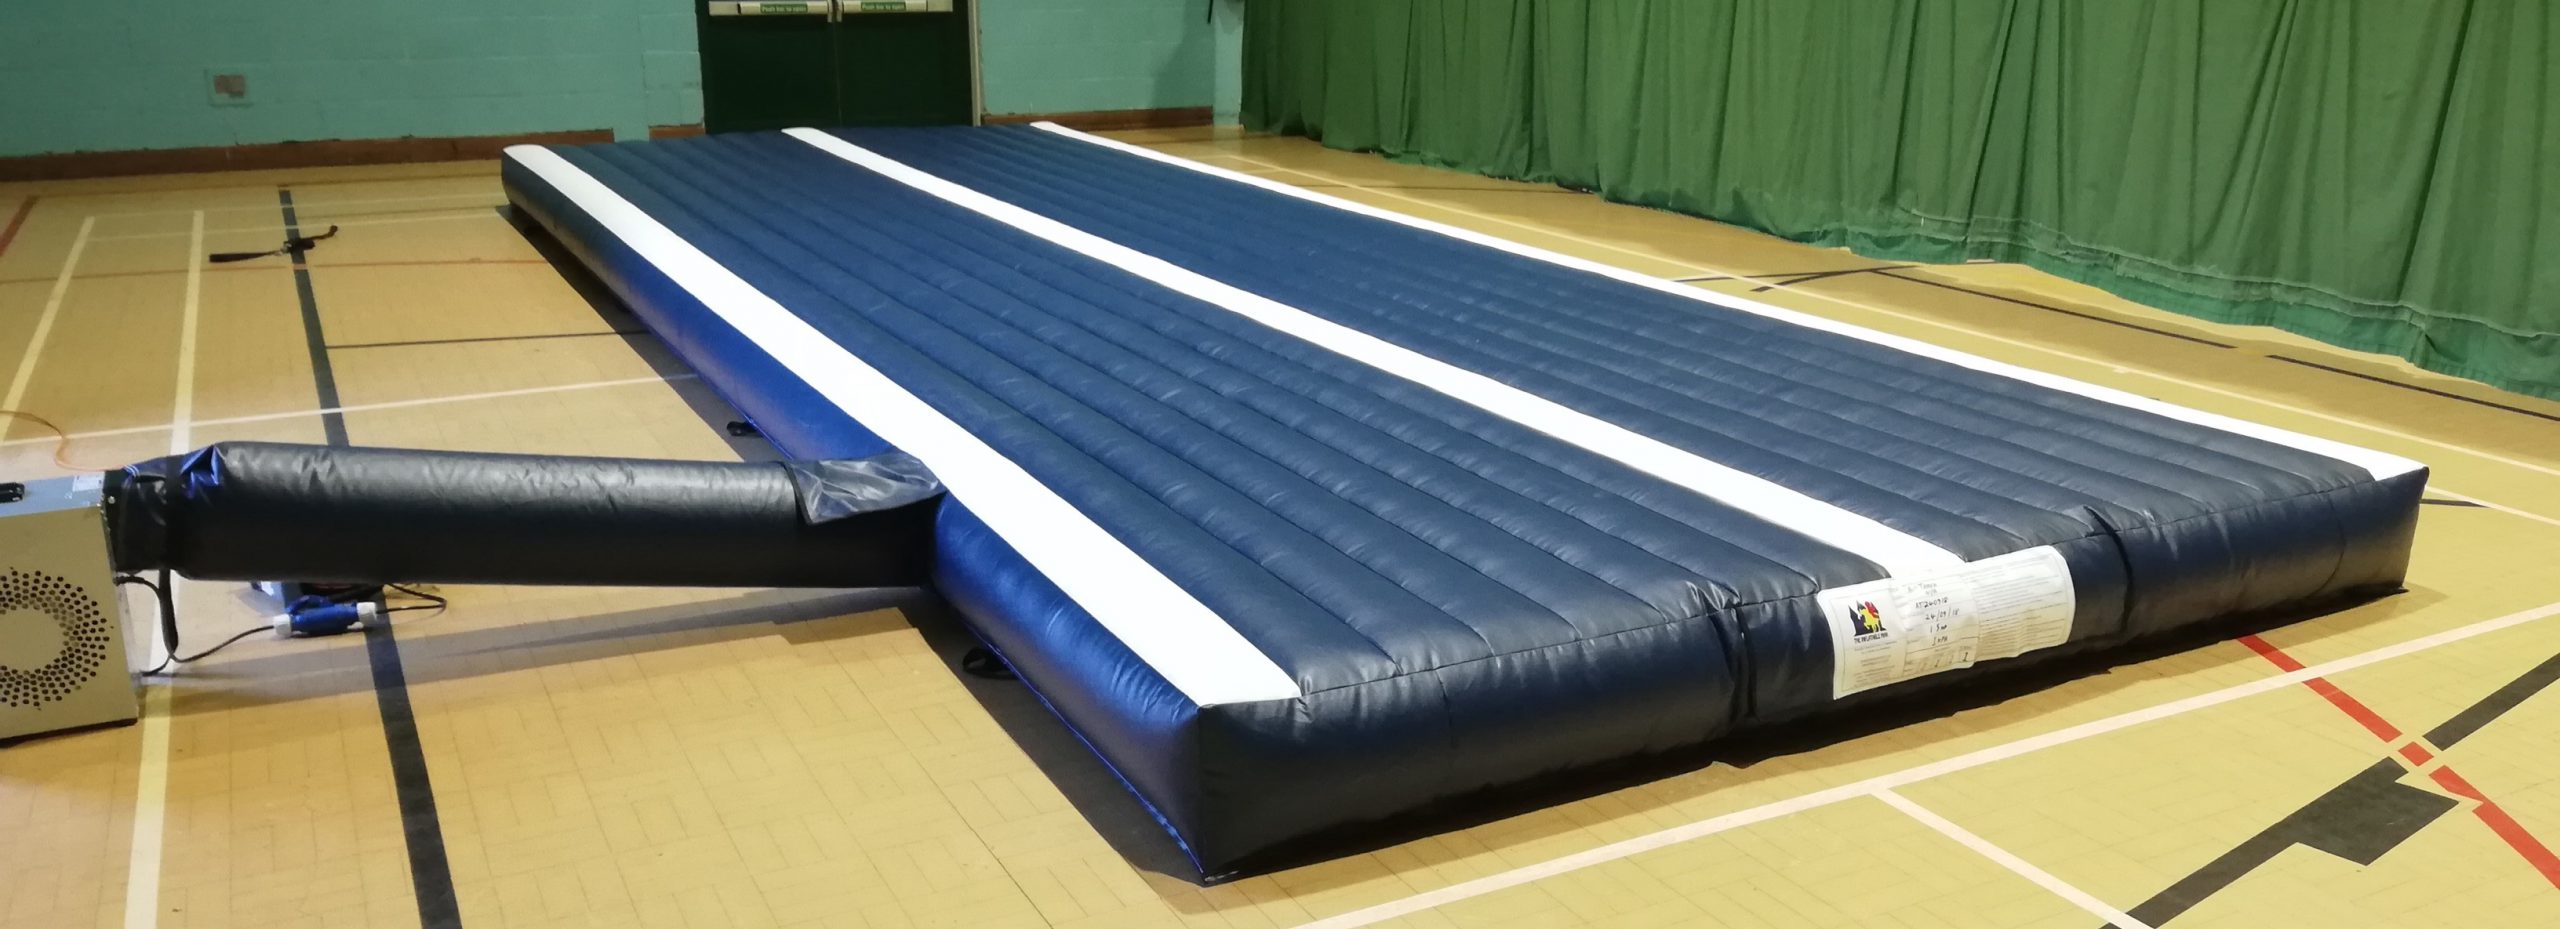 AirPit Tumble Track for gymnastics tumbling in blue with white lines